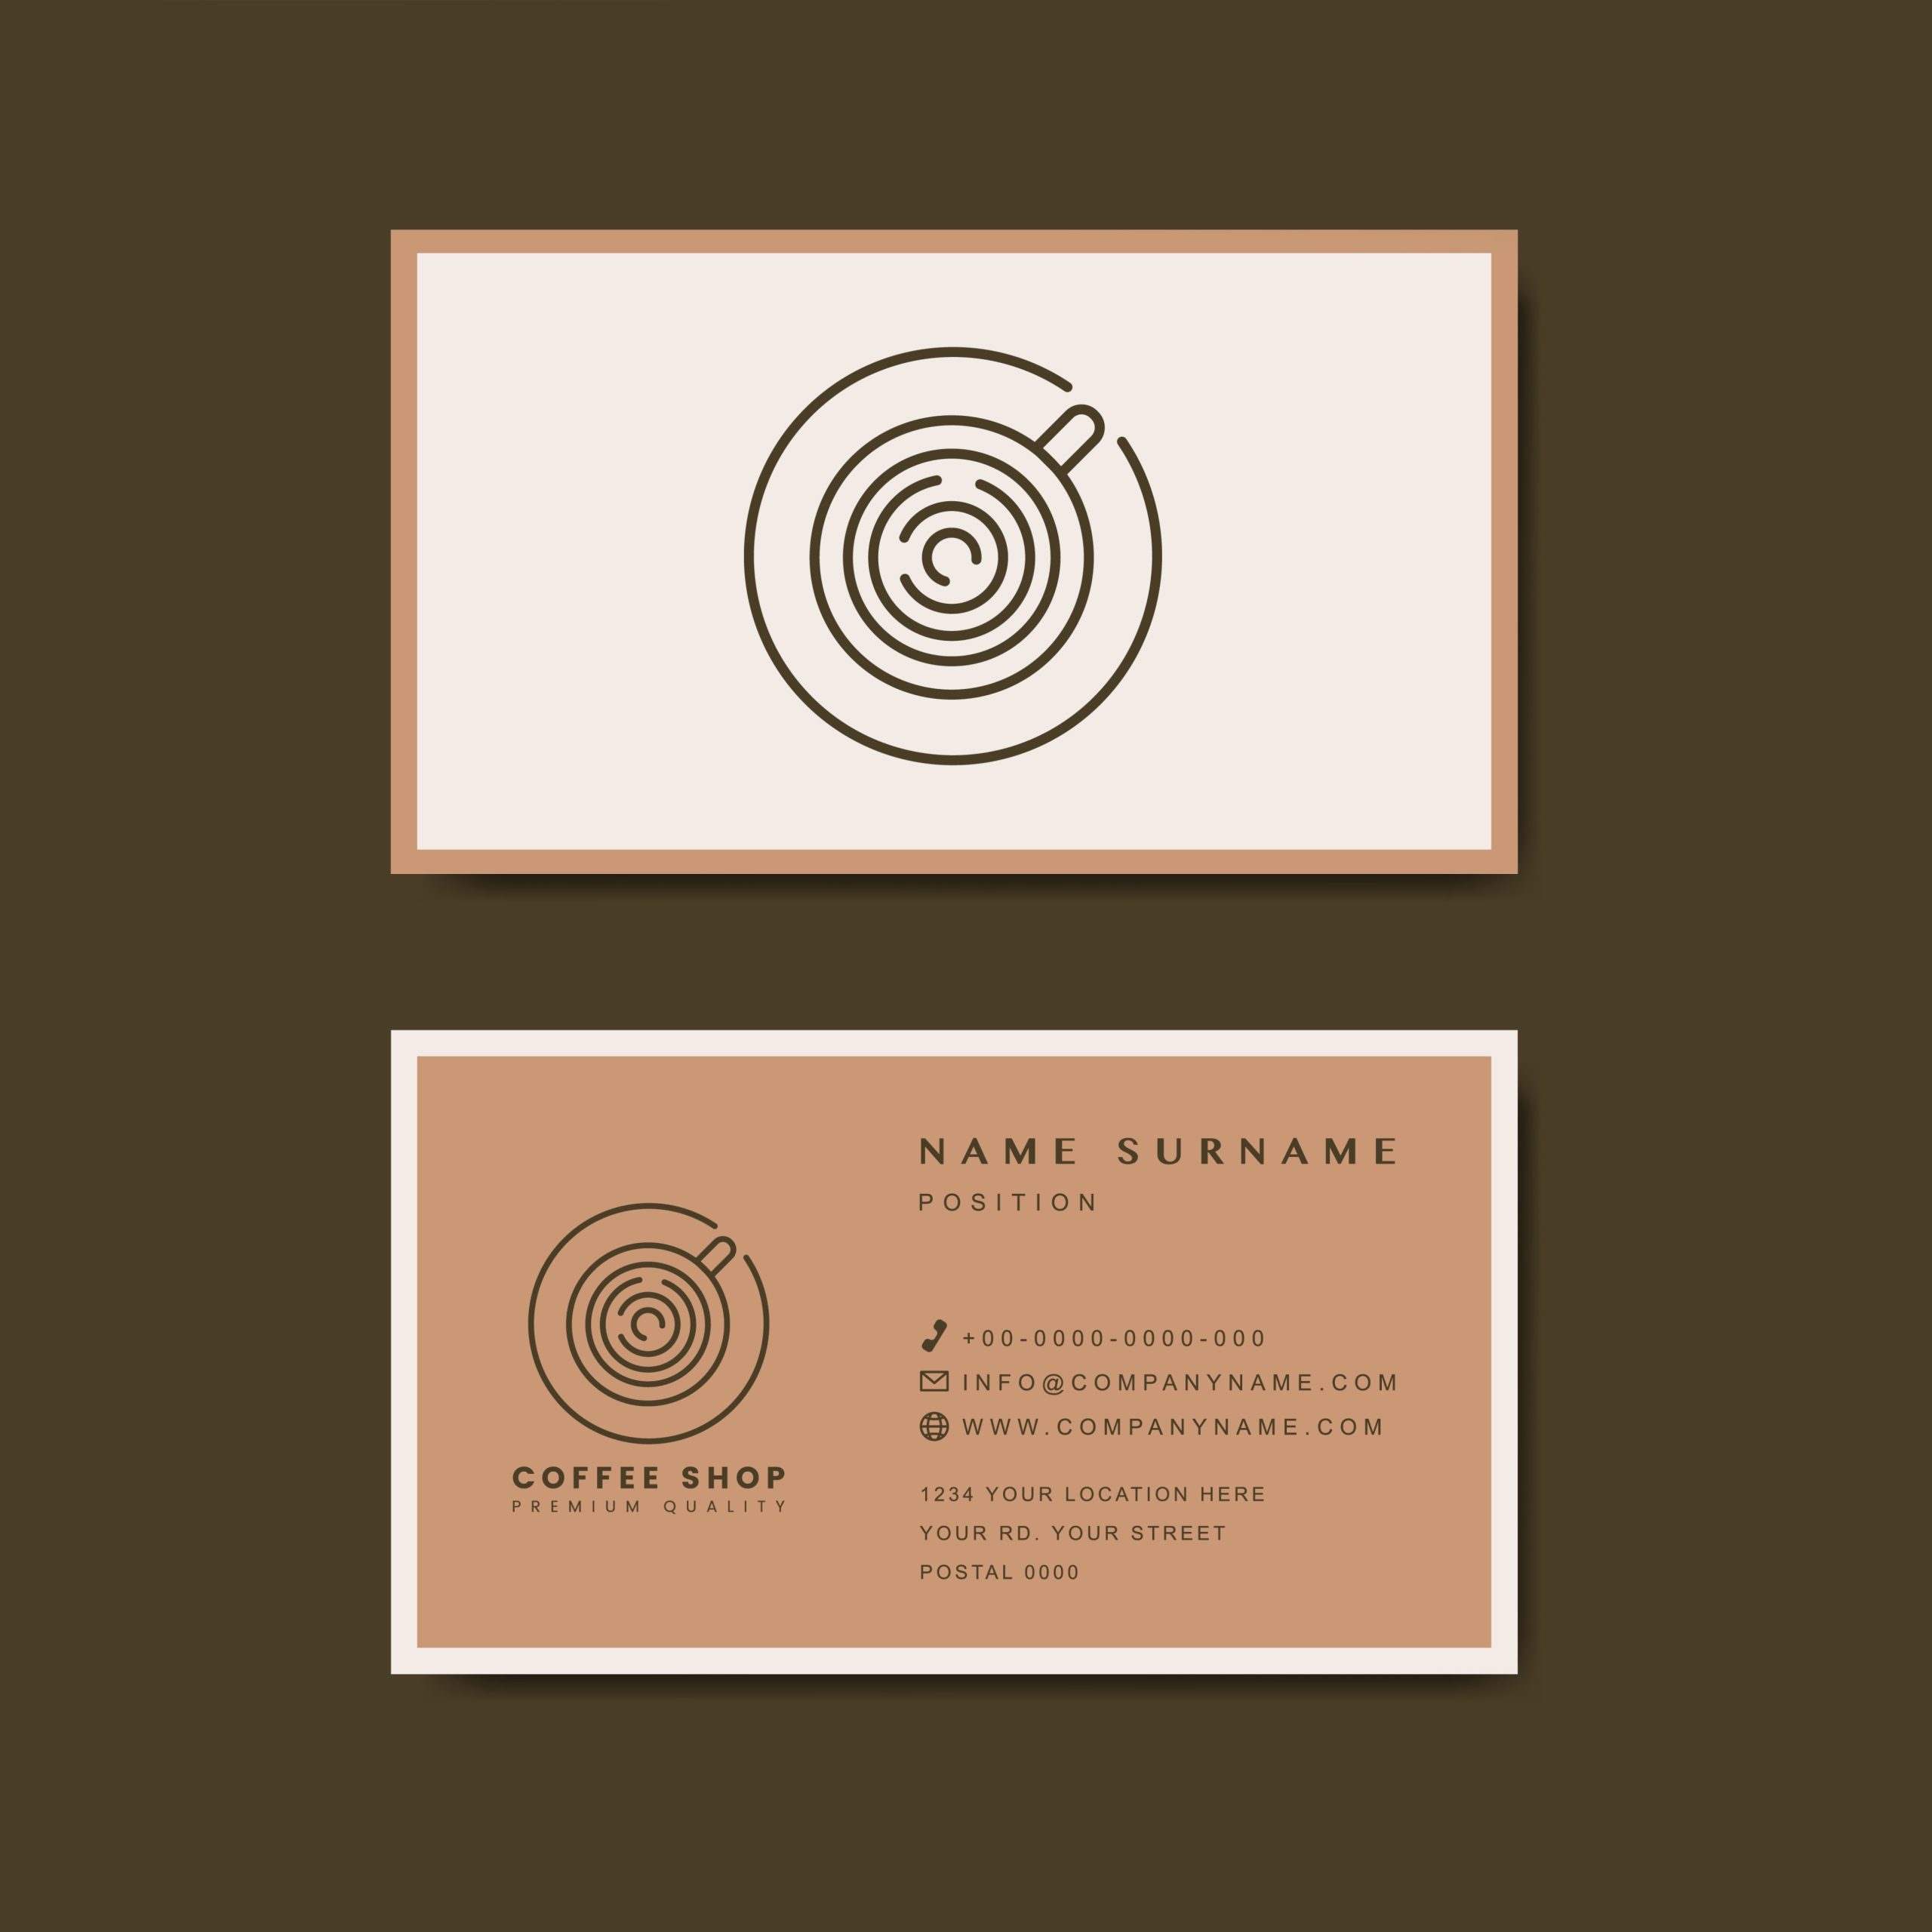 Coffee Shop Business Card Template Vector - Download Free Vectors within Coffee Business Card Template Free